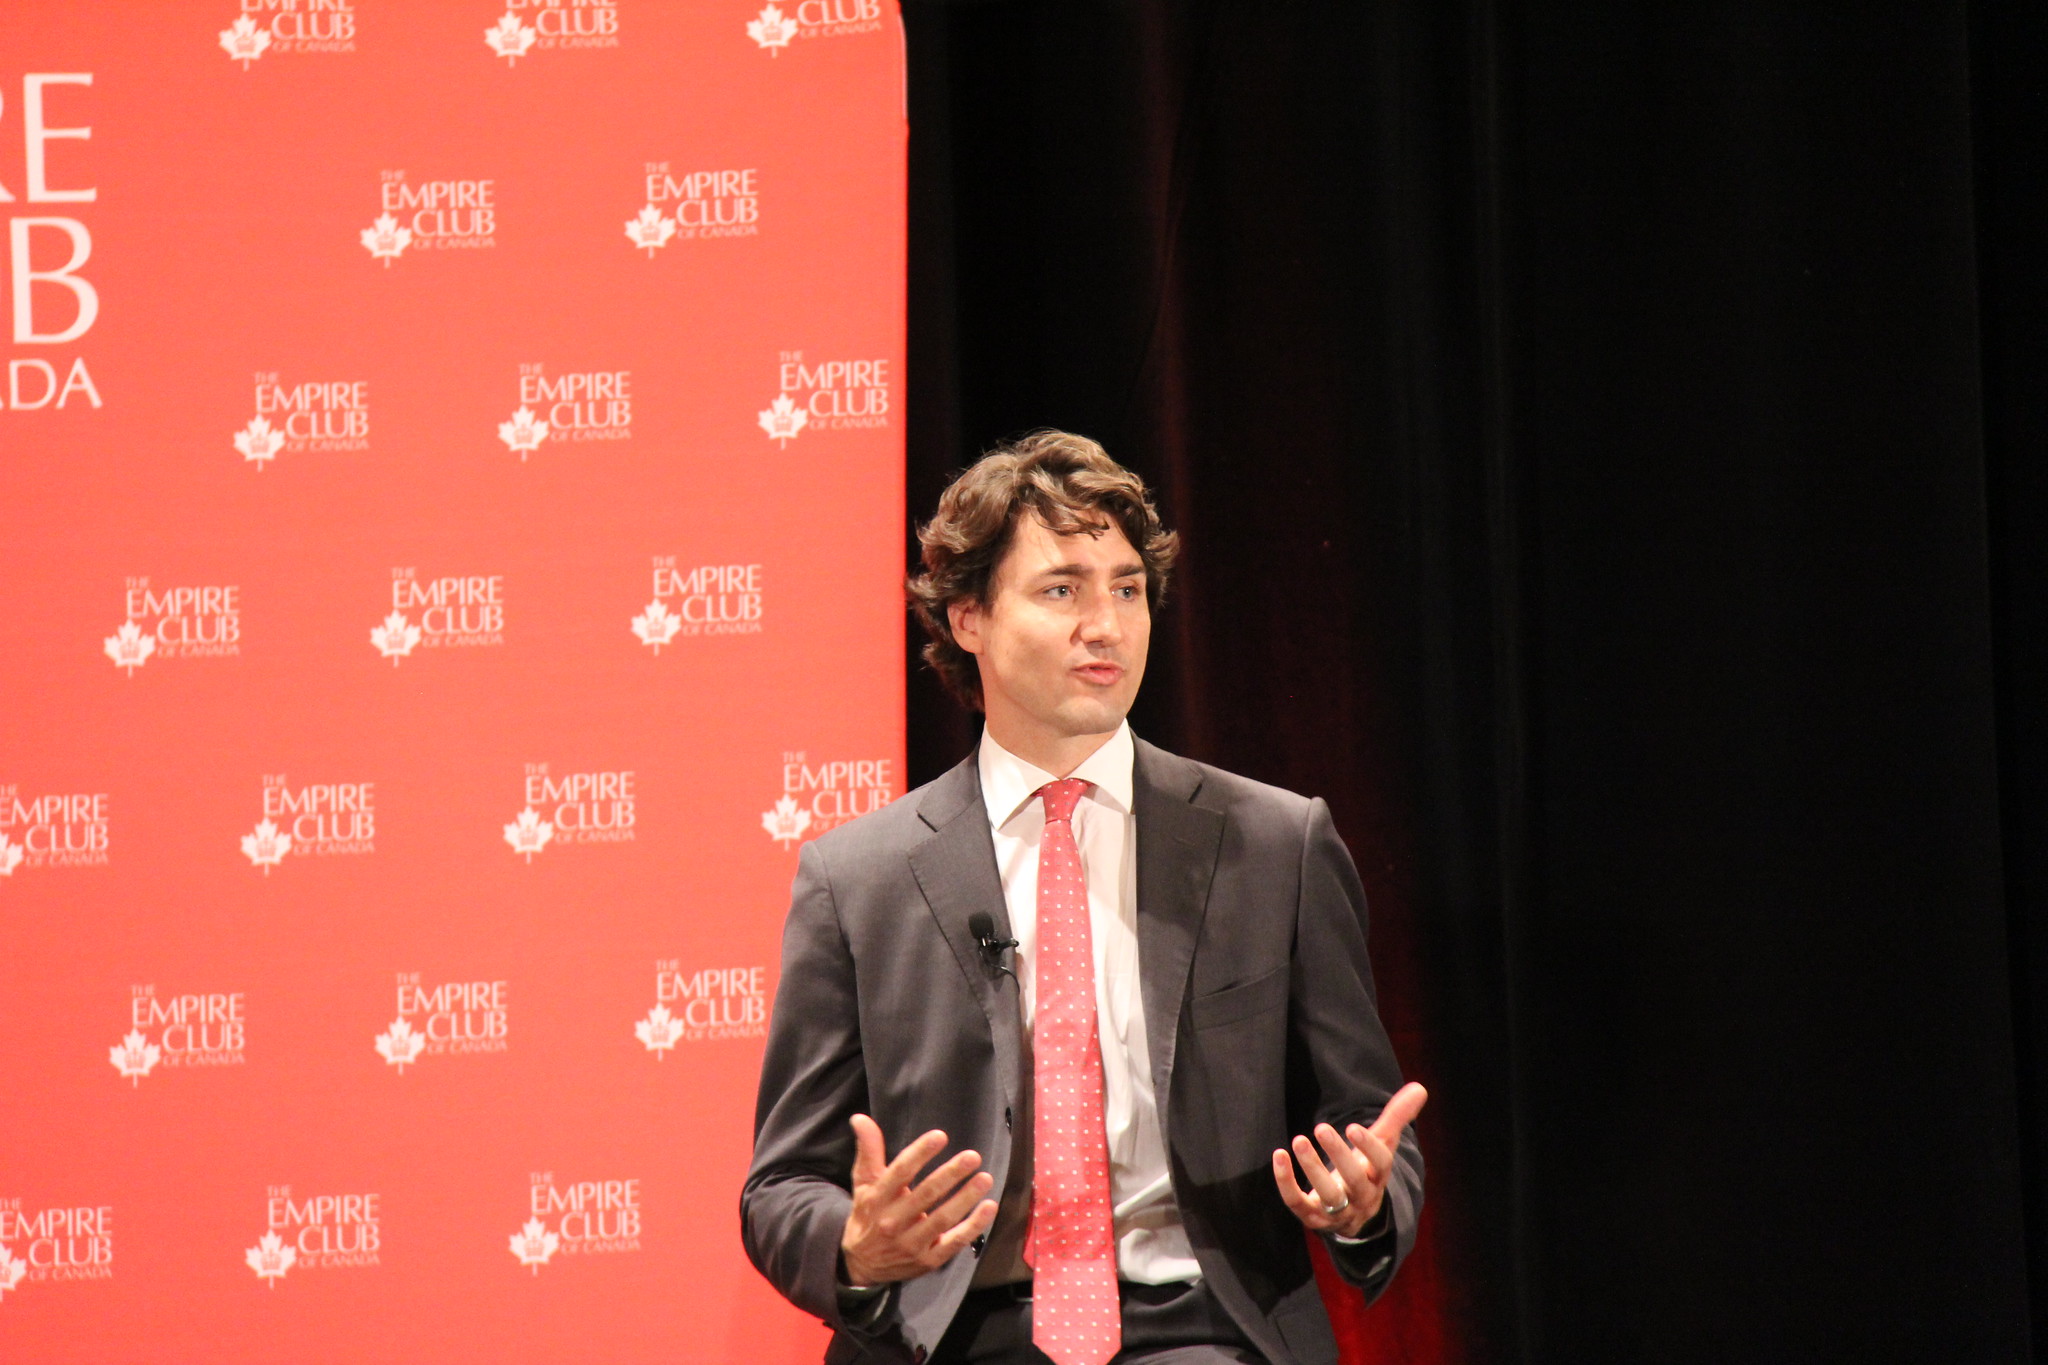 Prime Minister Justin Trudeau speaking with open hands. He is wearing a dark suit jacket, white shirt and red tie and is standing in front of a red background